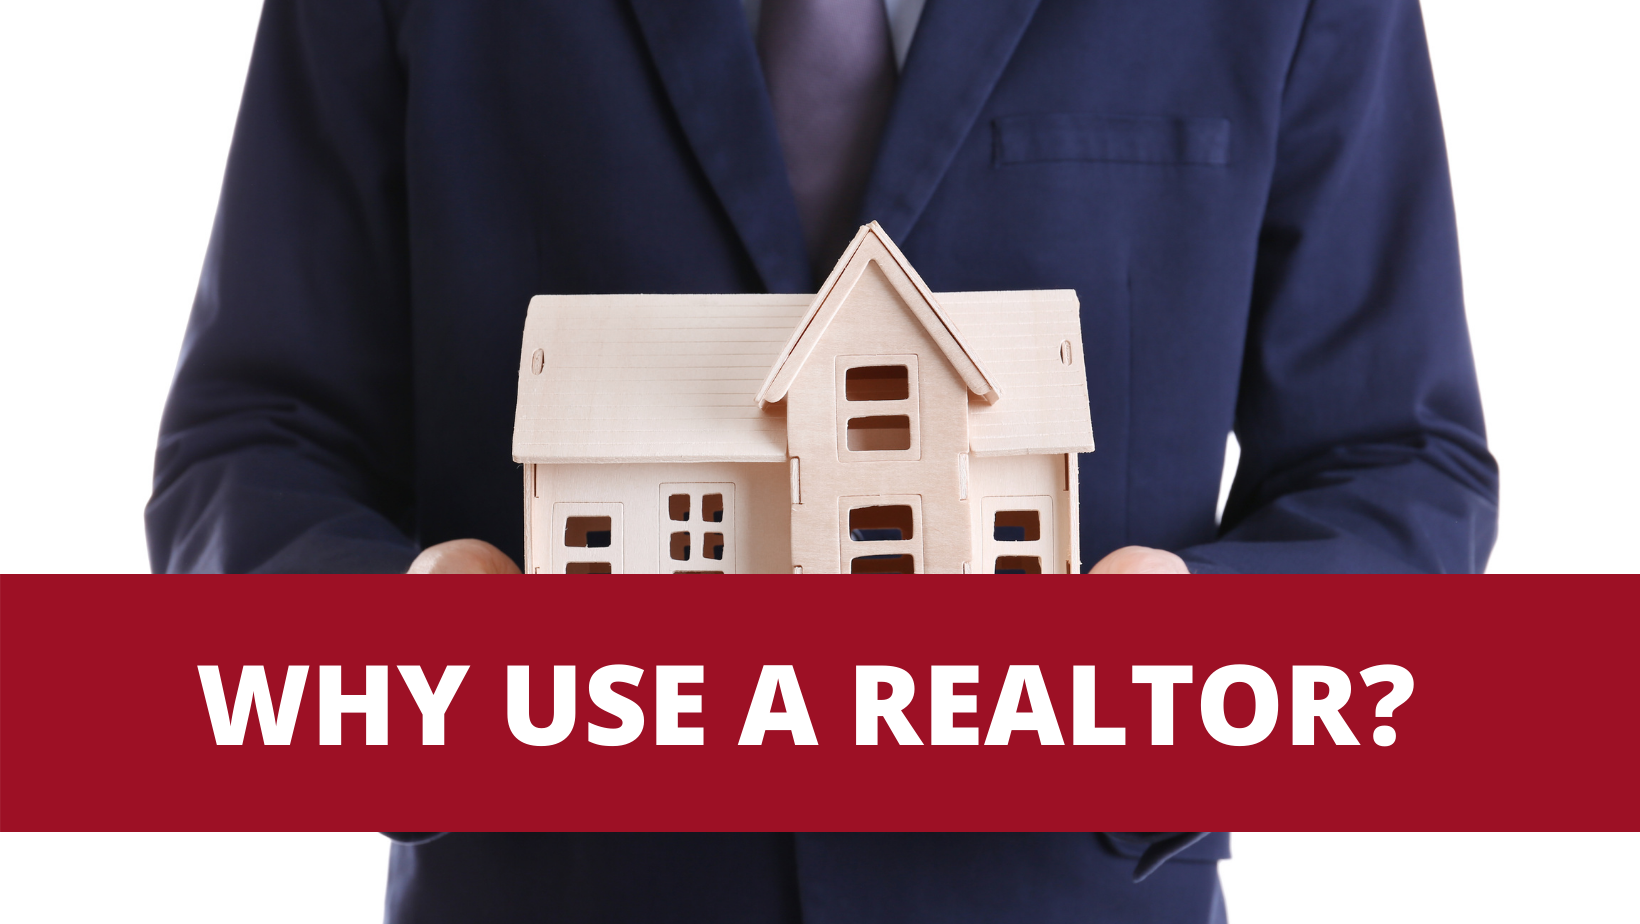 Why Use a Realtor to Sell Your Home?